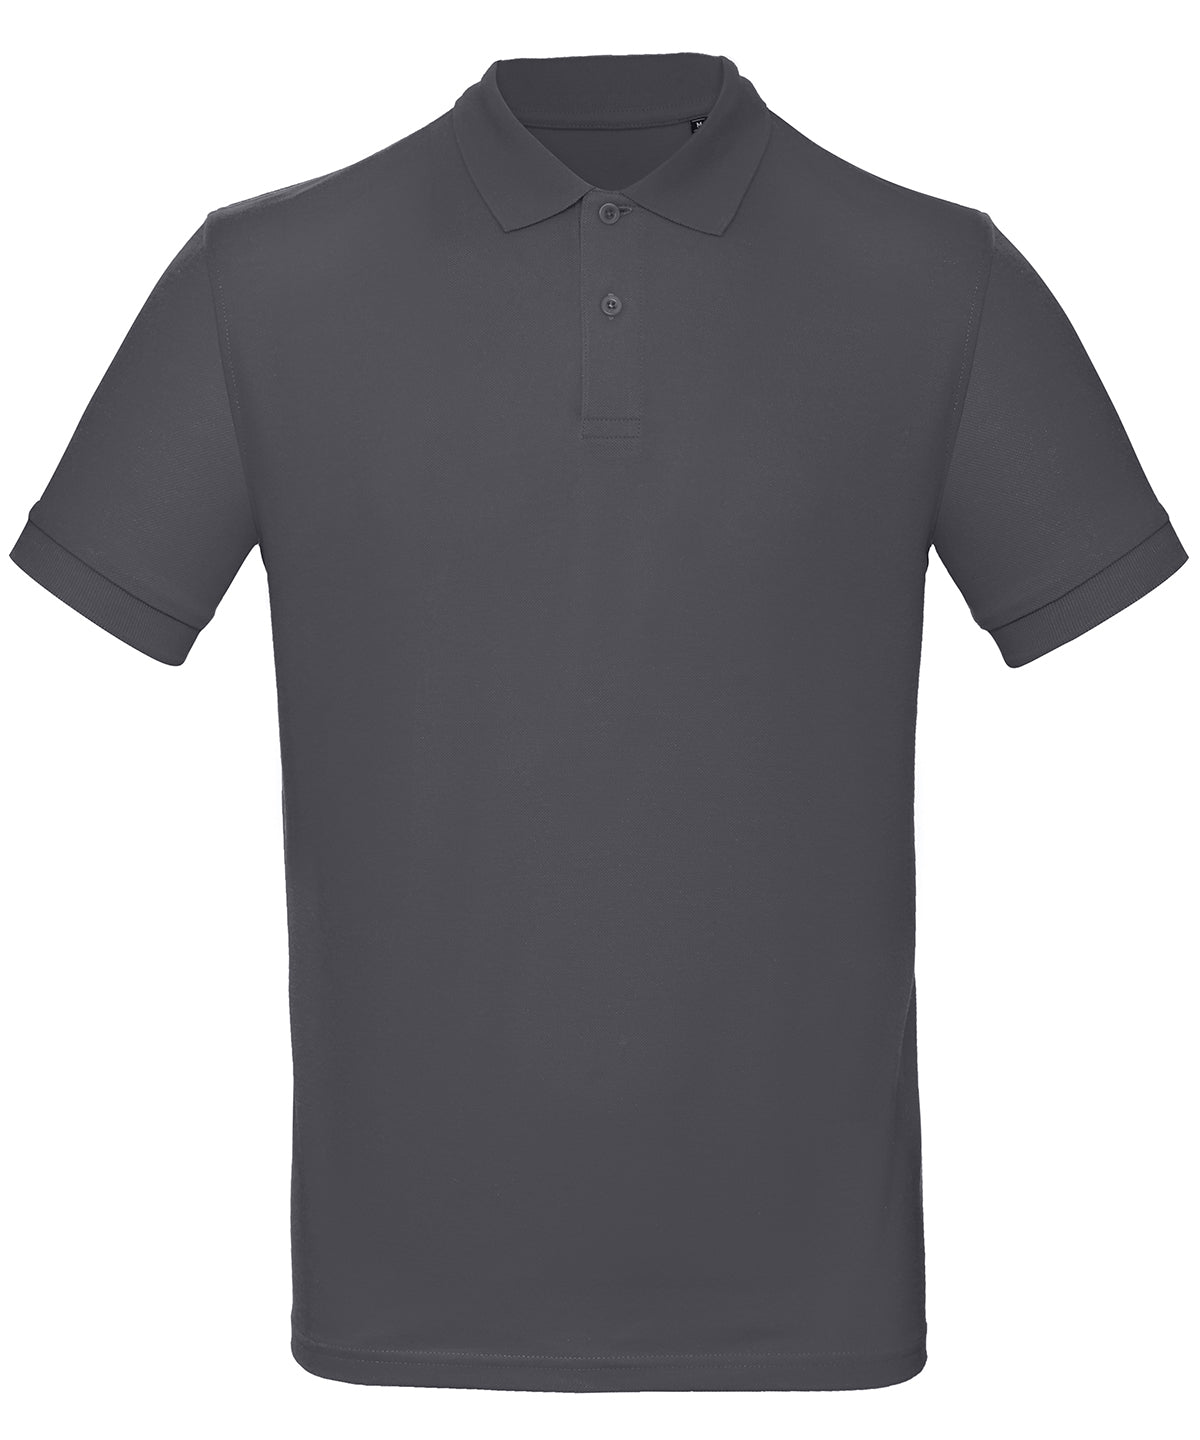 Personalised Polo Shirts - Navy B&C Collection B&C Inspire Polo /men